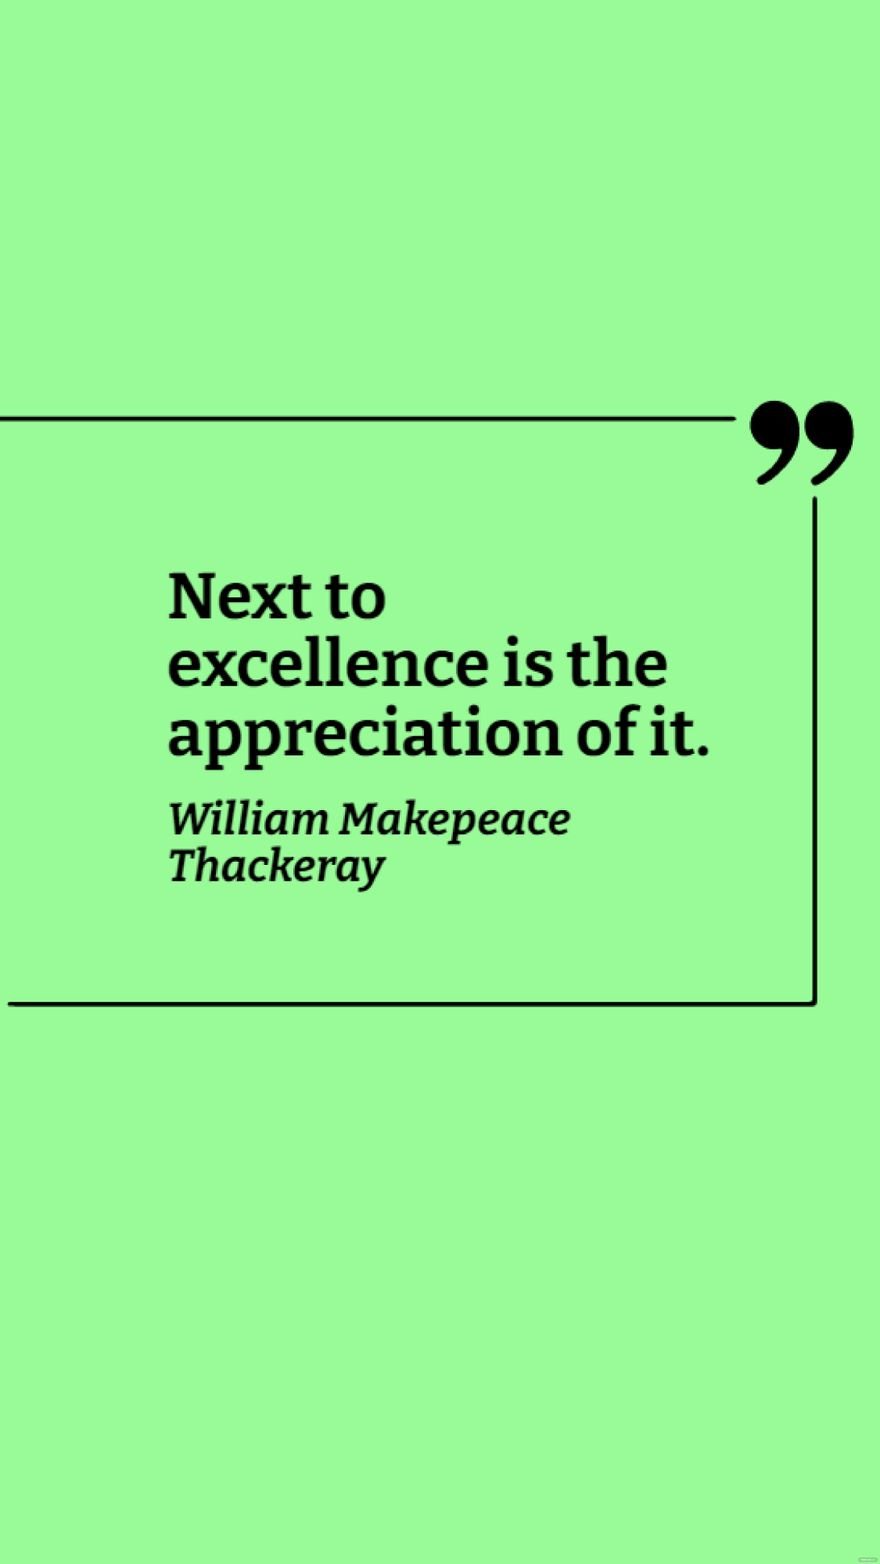 Free William Makepeace Thackeray - Next to excellence is the appreciation of it. in JPG